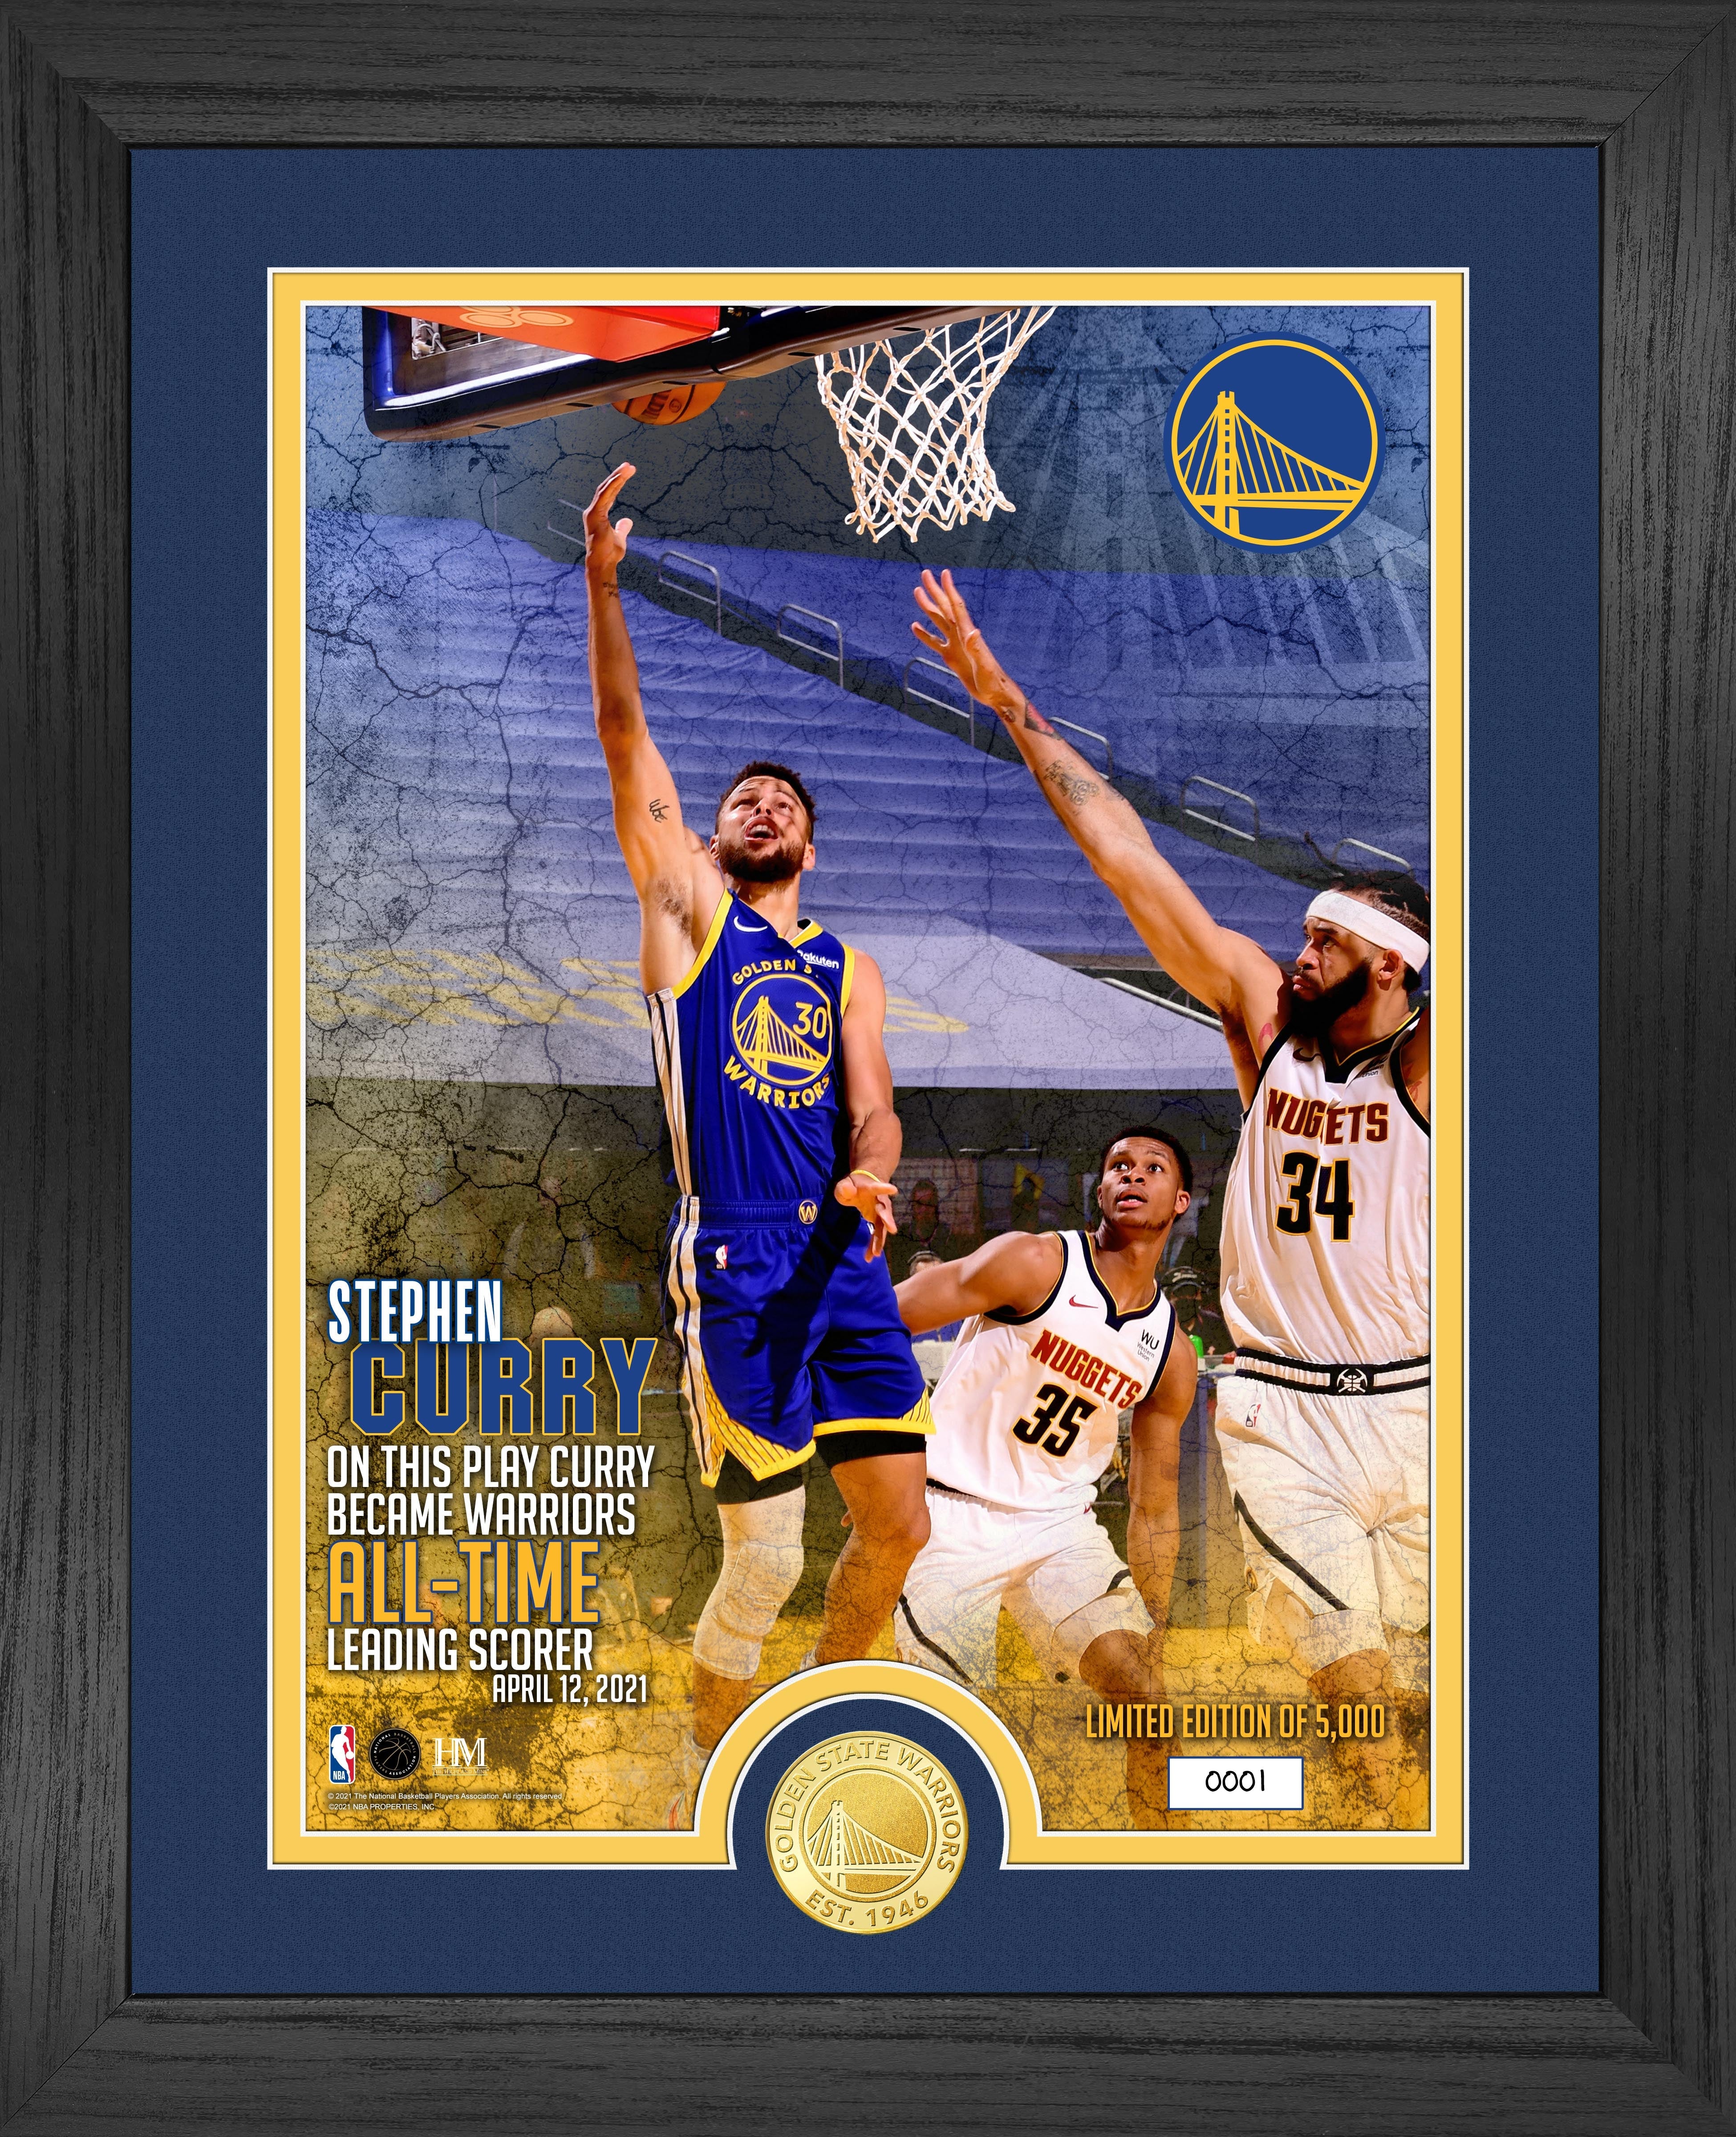 Steph Curry Leading Scorer Bronze Coin Photo Mint